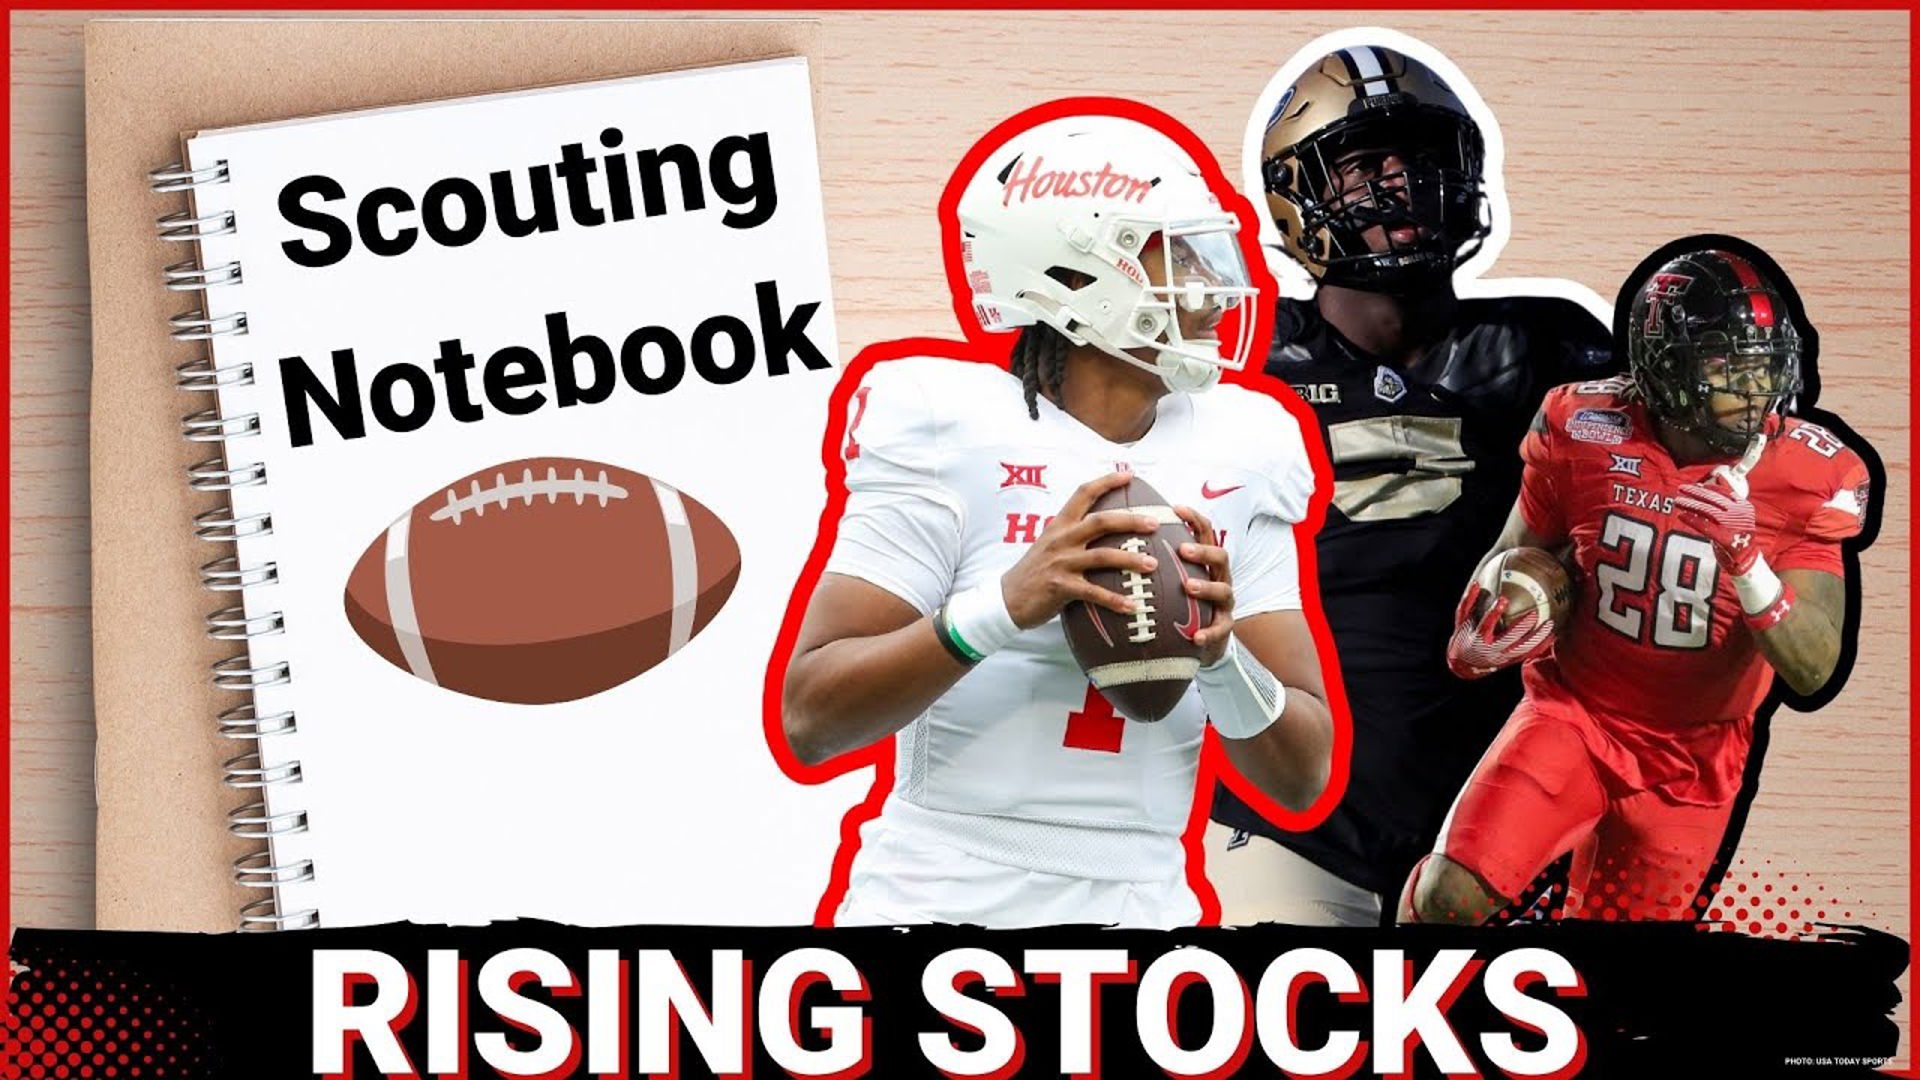 Houston Cougars' star dual-threat QB Donovan Smith has 1st round talent & tools. DP did a deep dive into his film & broke down what makes him a potential special QB